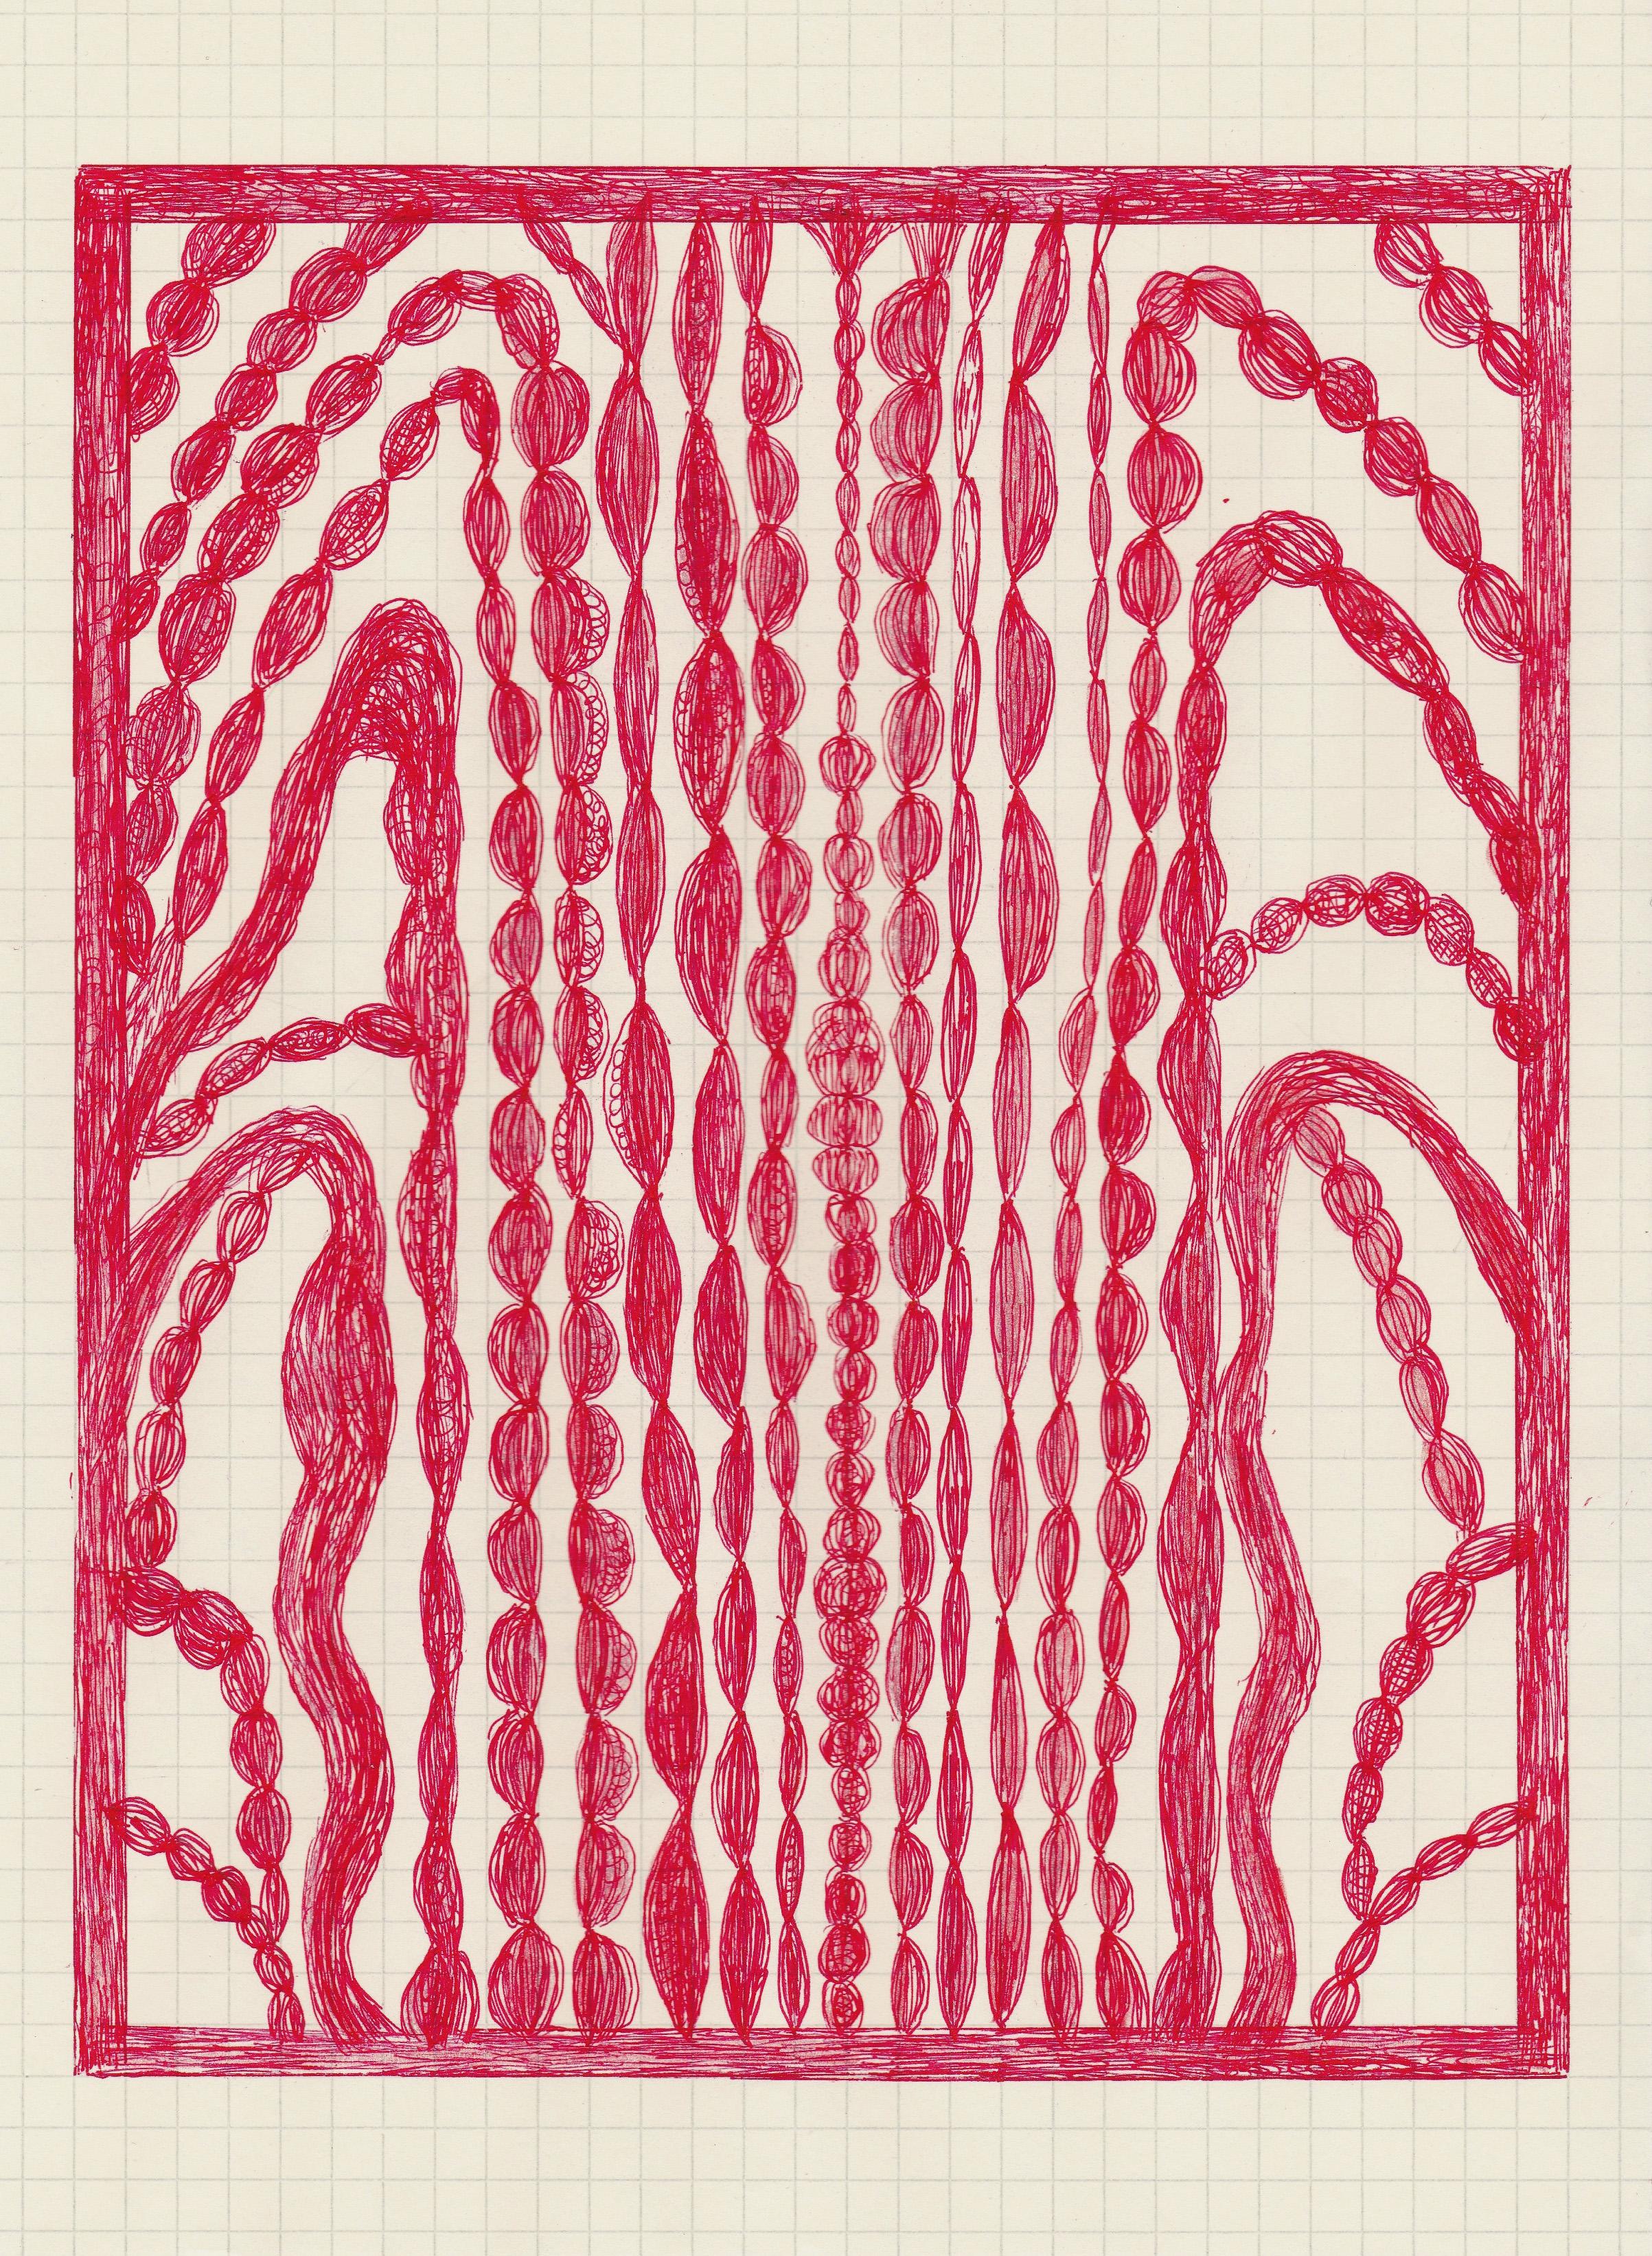 In the North Woods, abstract geometric pattern, red work on paper